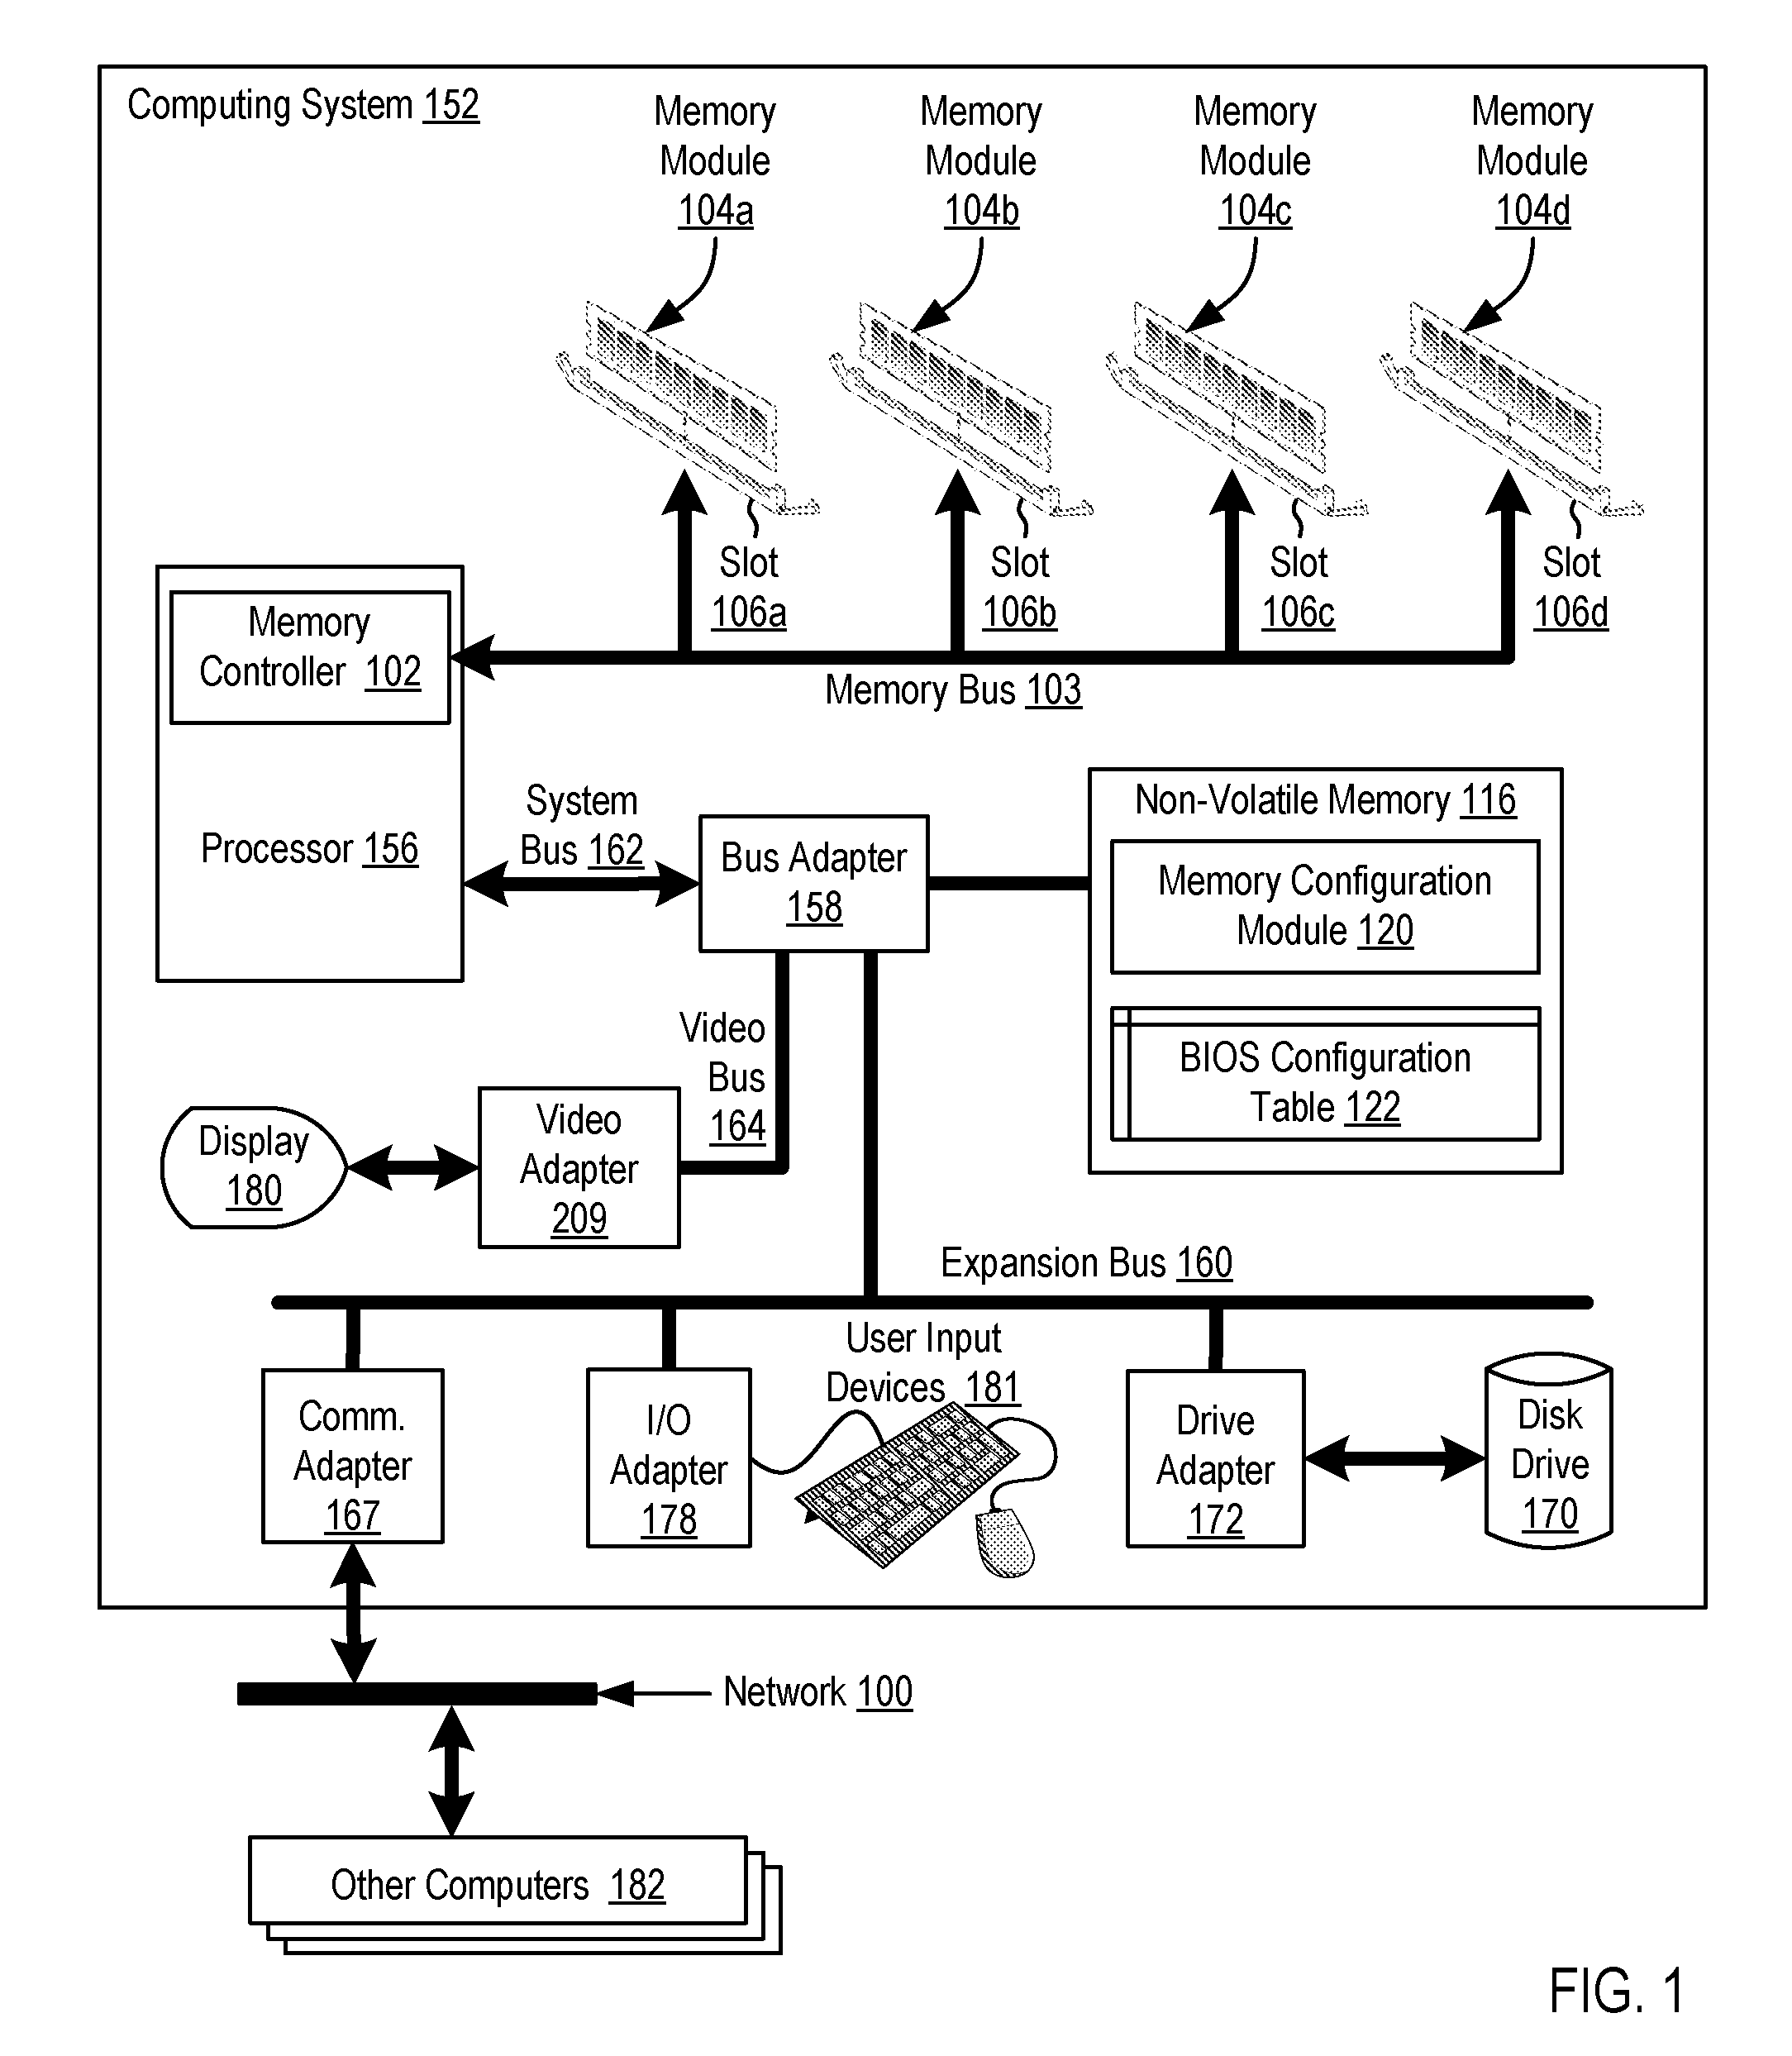 Enabling Memory Module Slots In A Computing System After A Repair Action